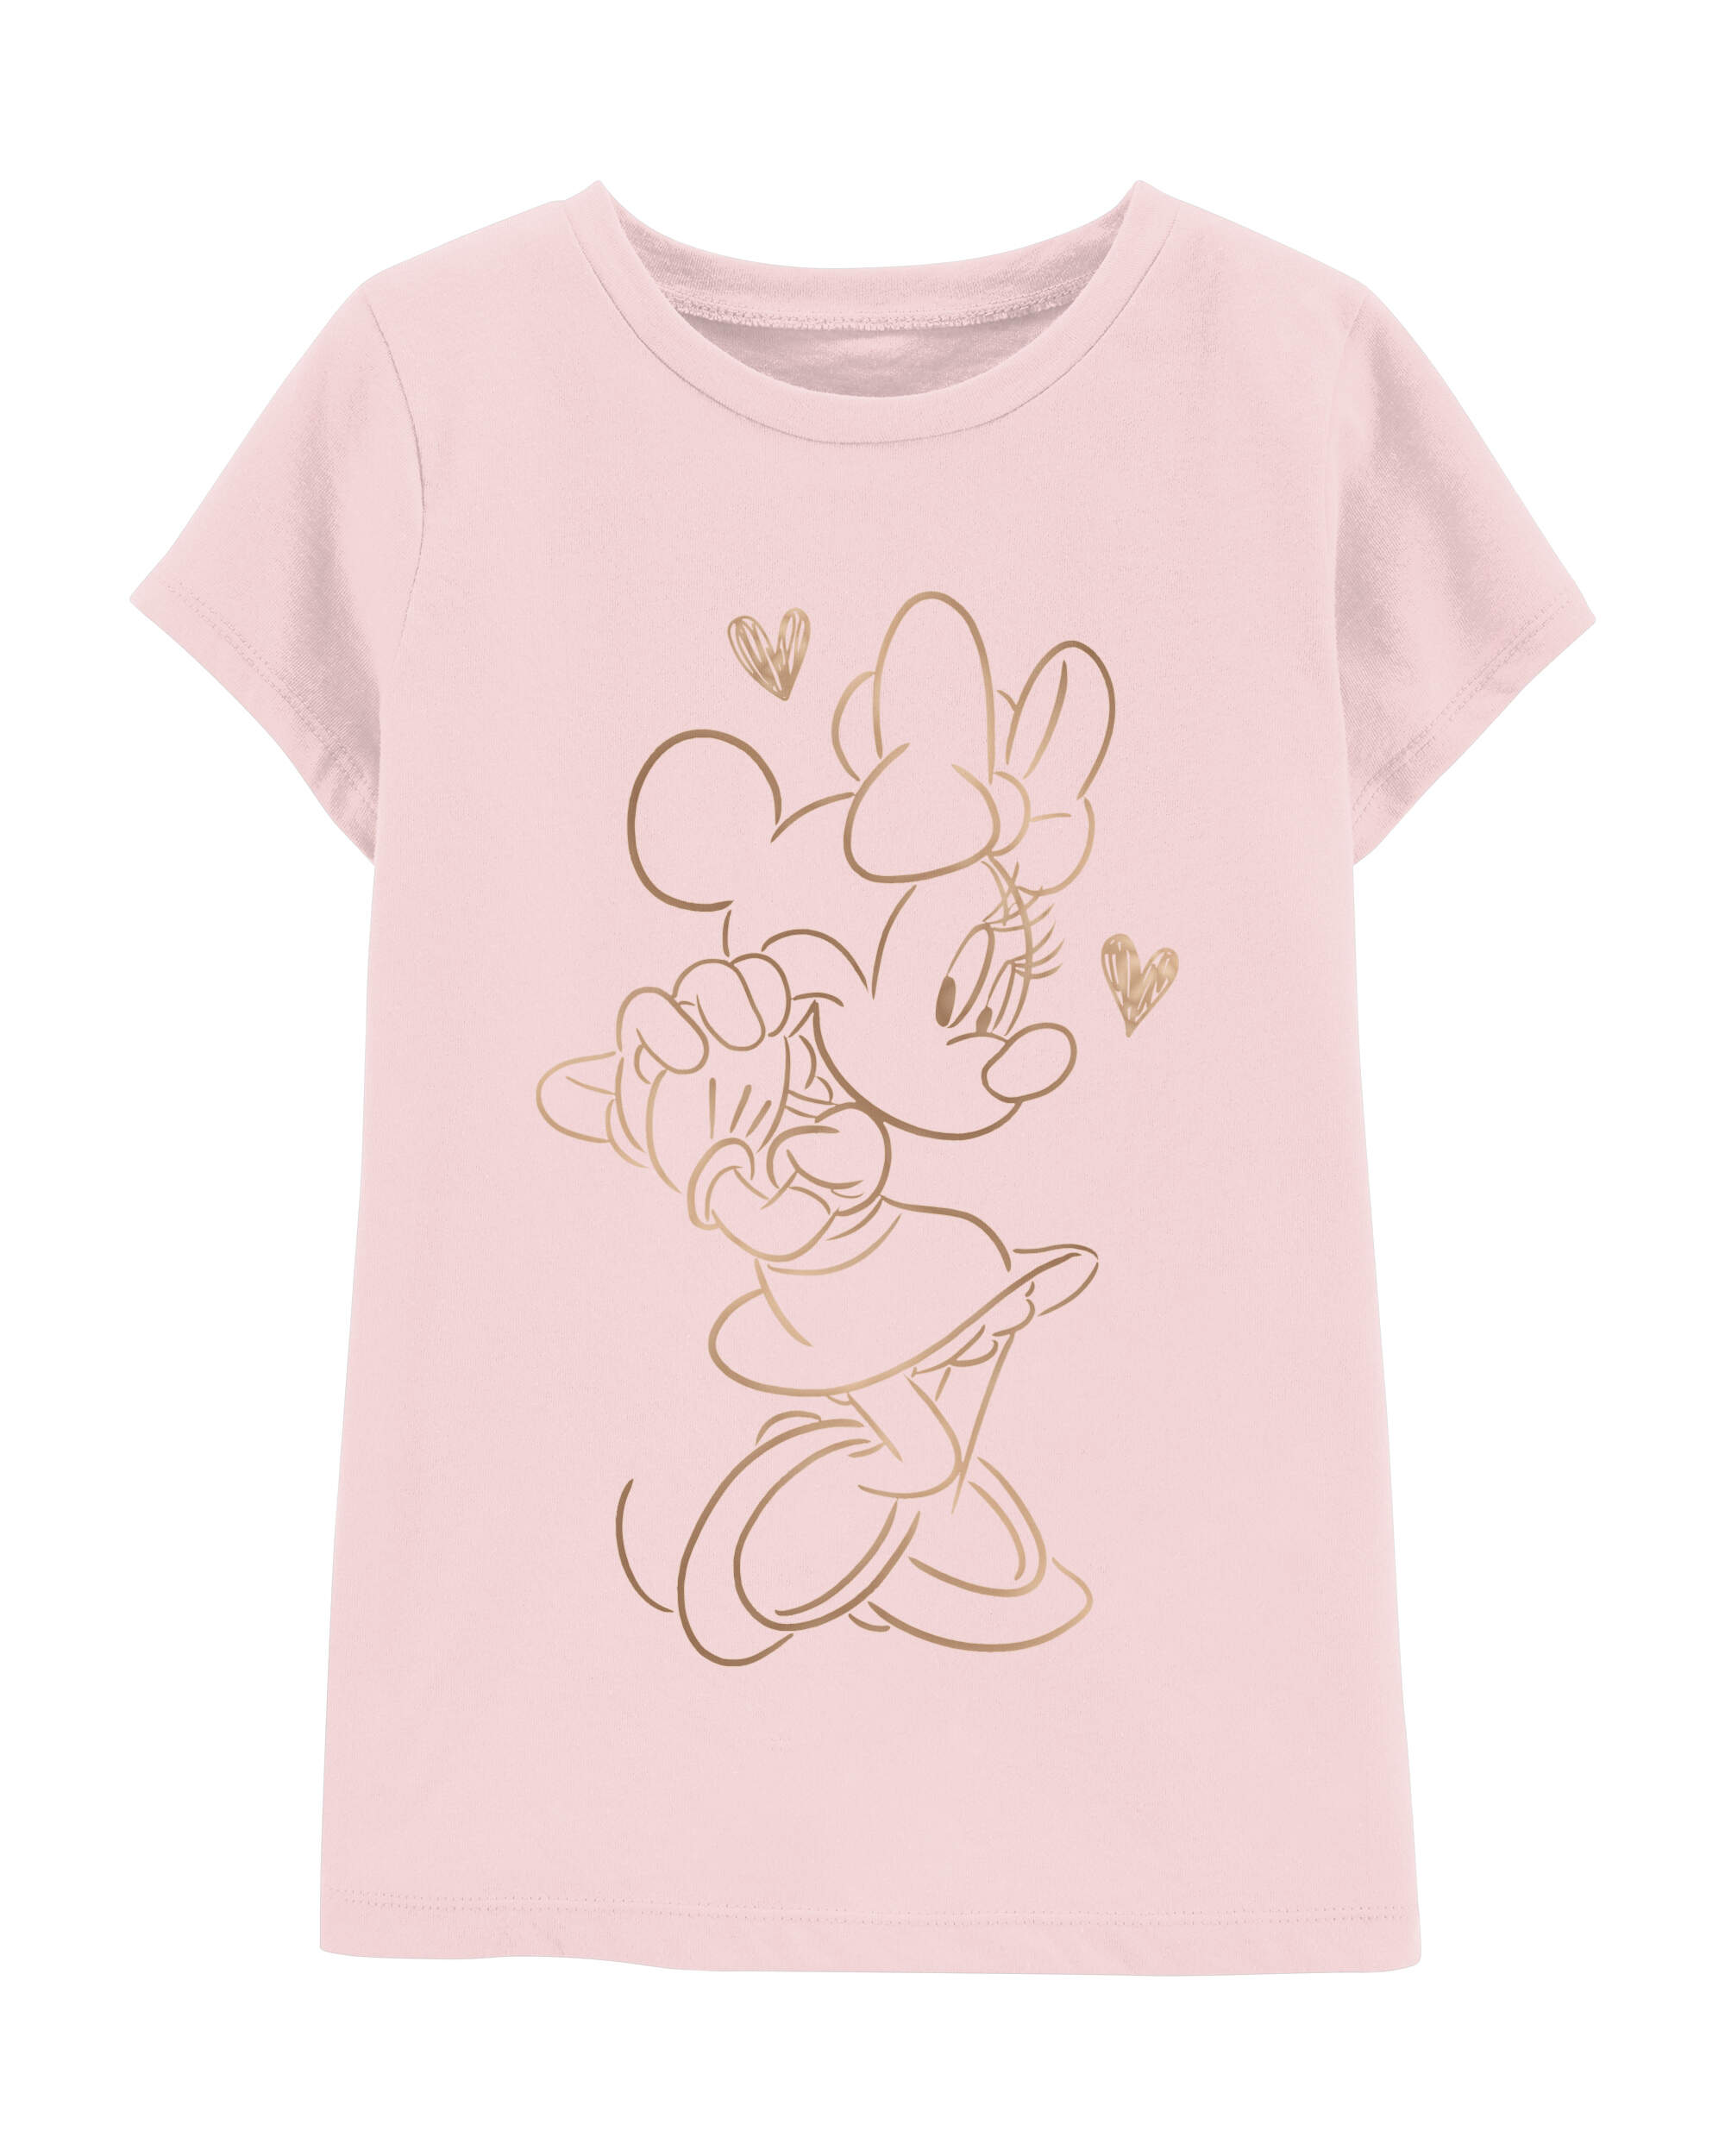 Toddler Minnie Mouse Tee